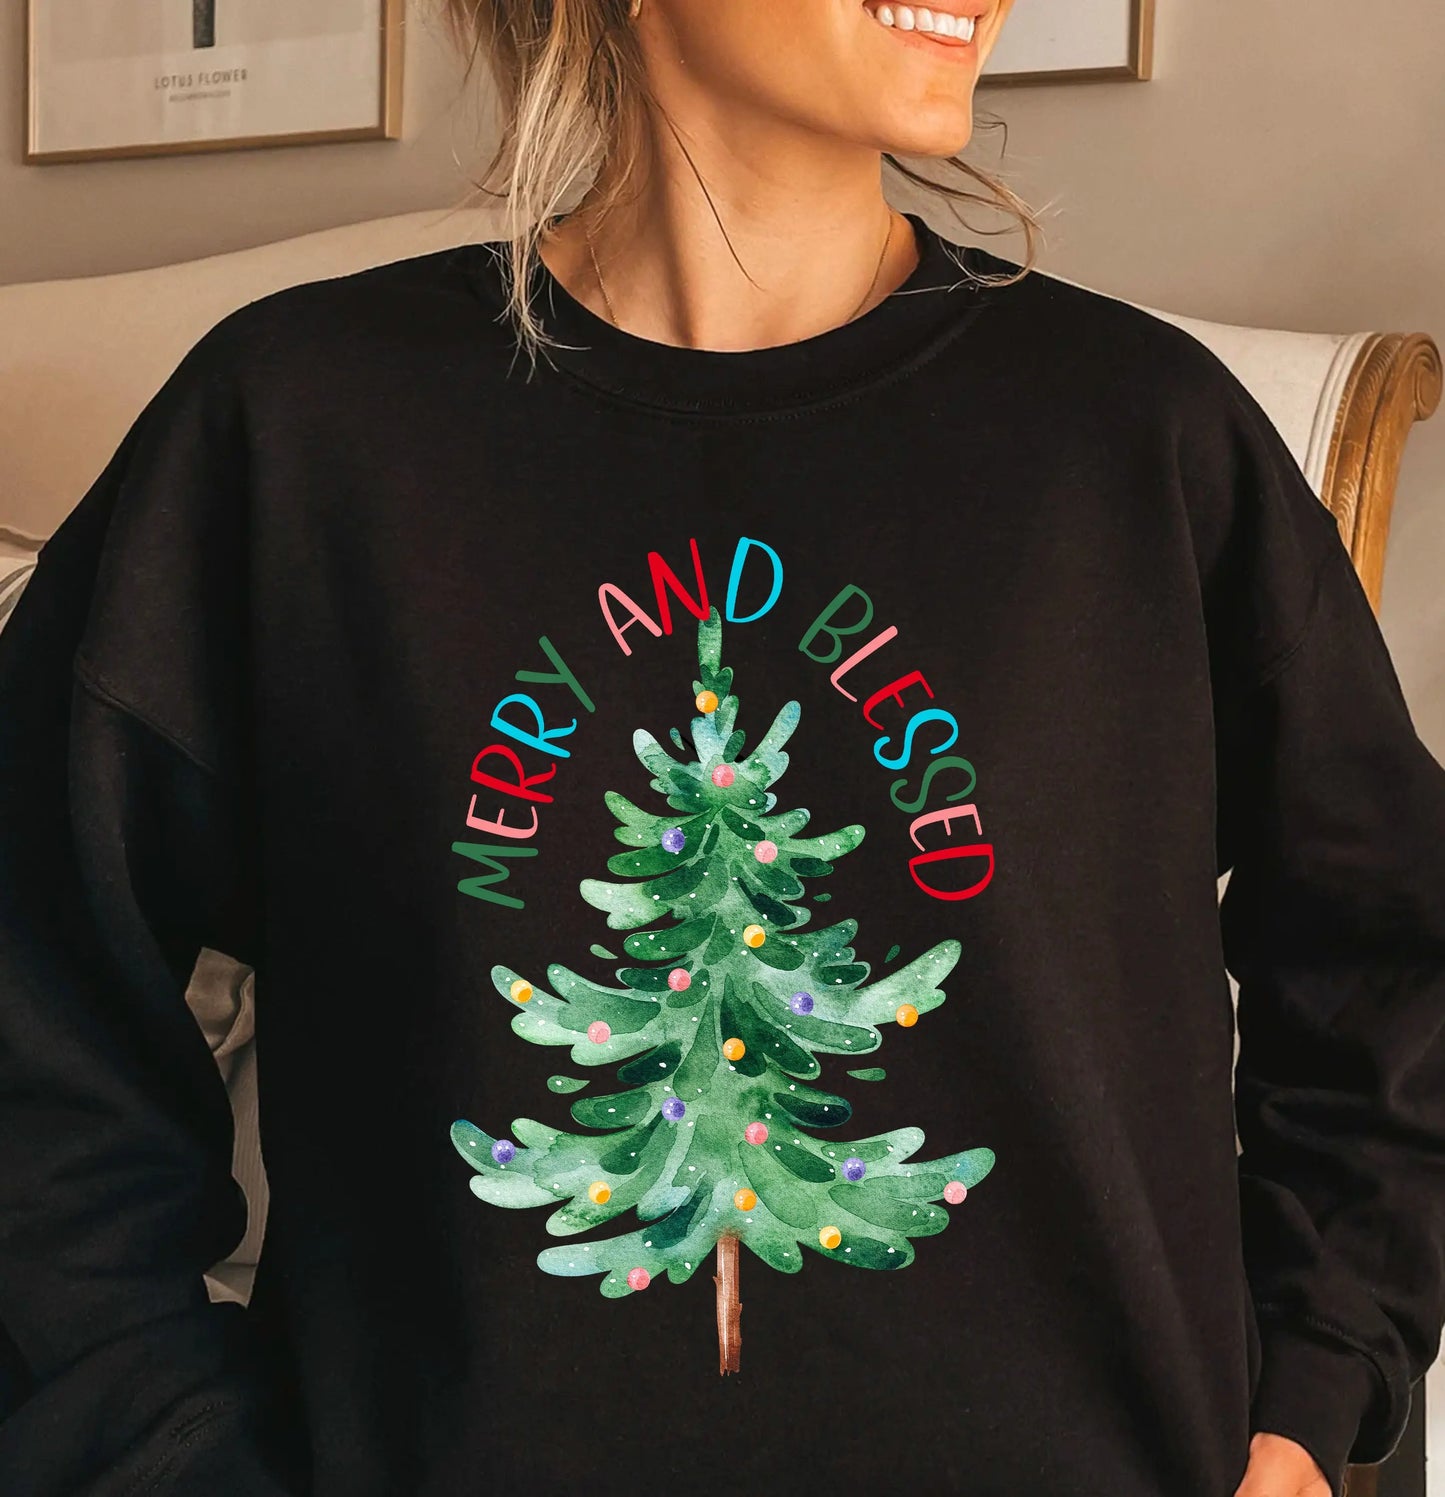 Merry and Blessed Christmas Sweatshirt - Amazing Faith Designs